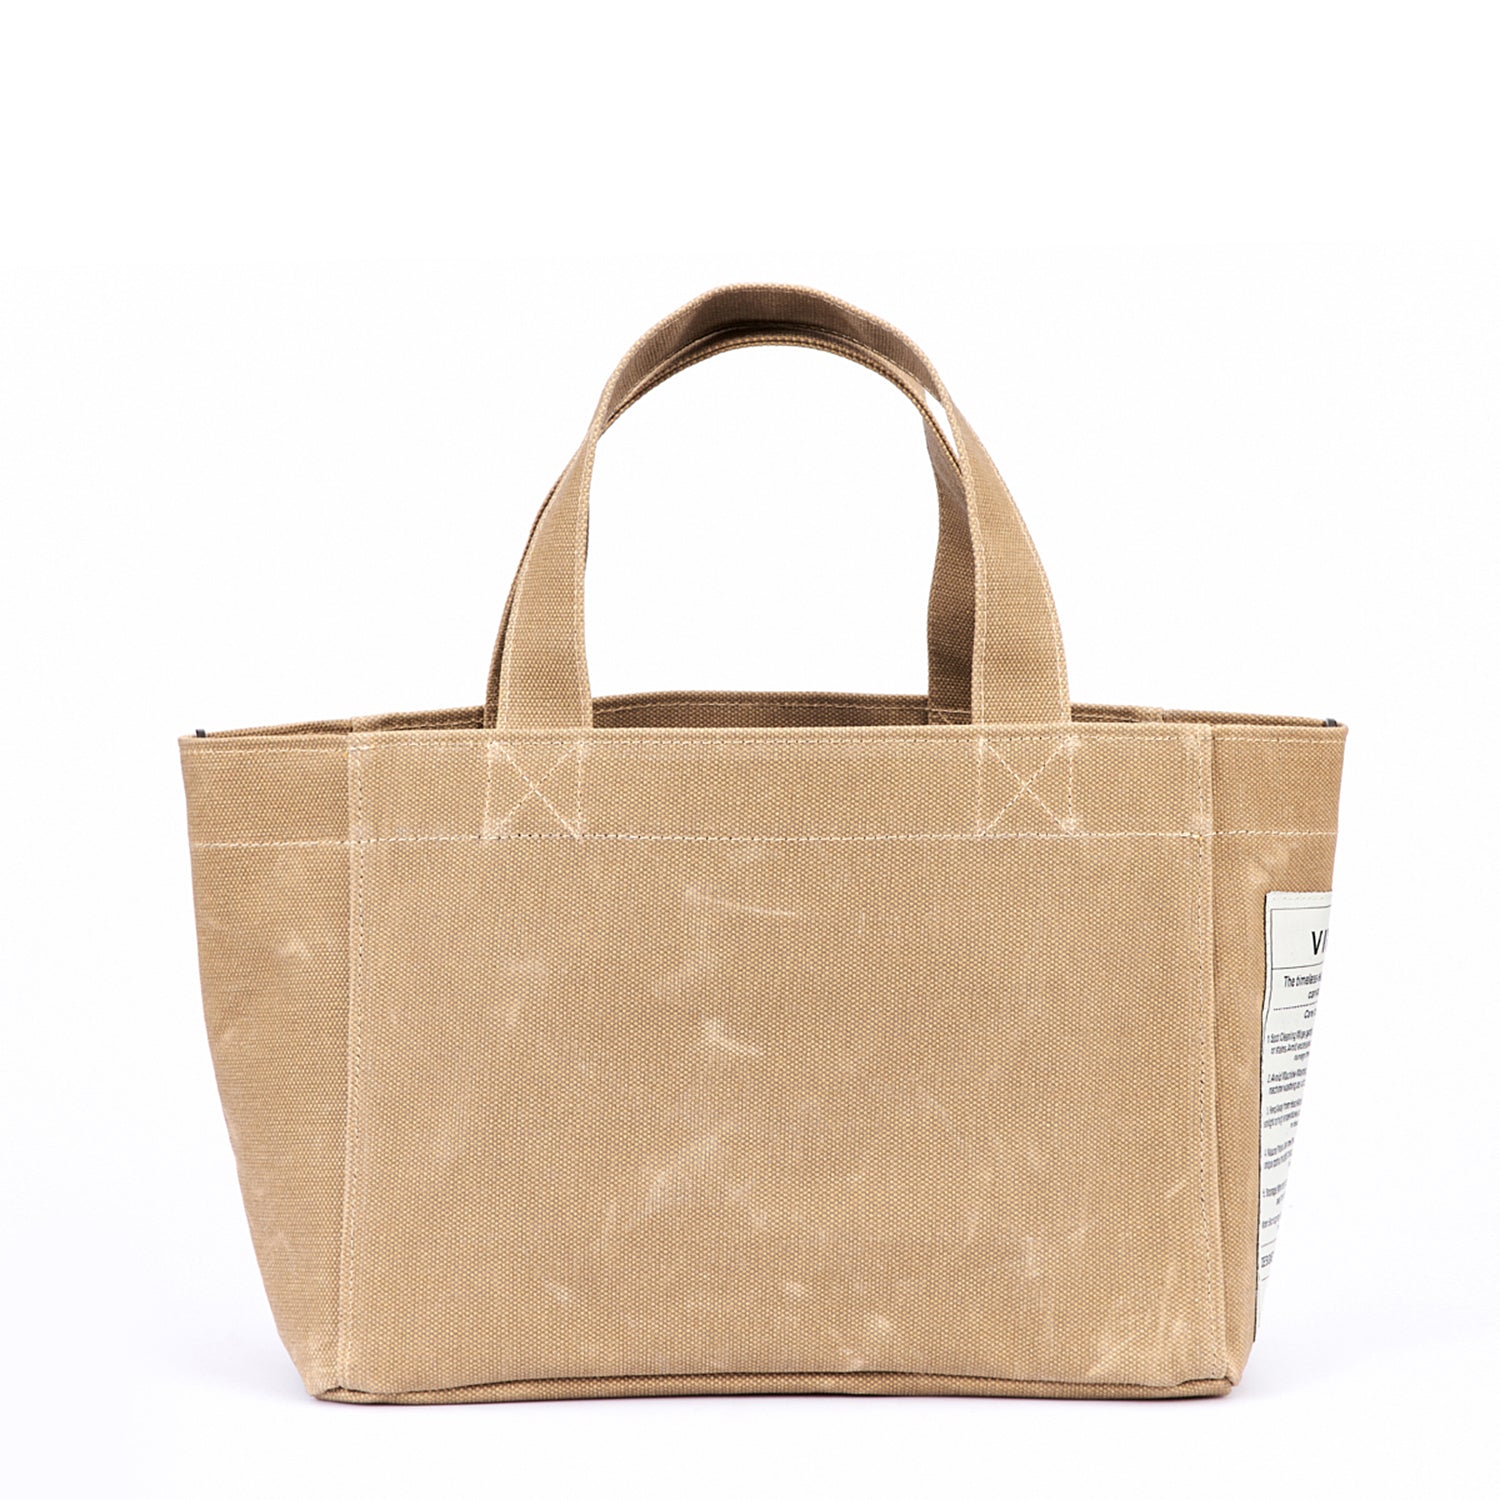 CANVAS BAG - SMALL - BEIGE